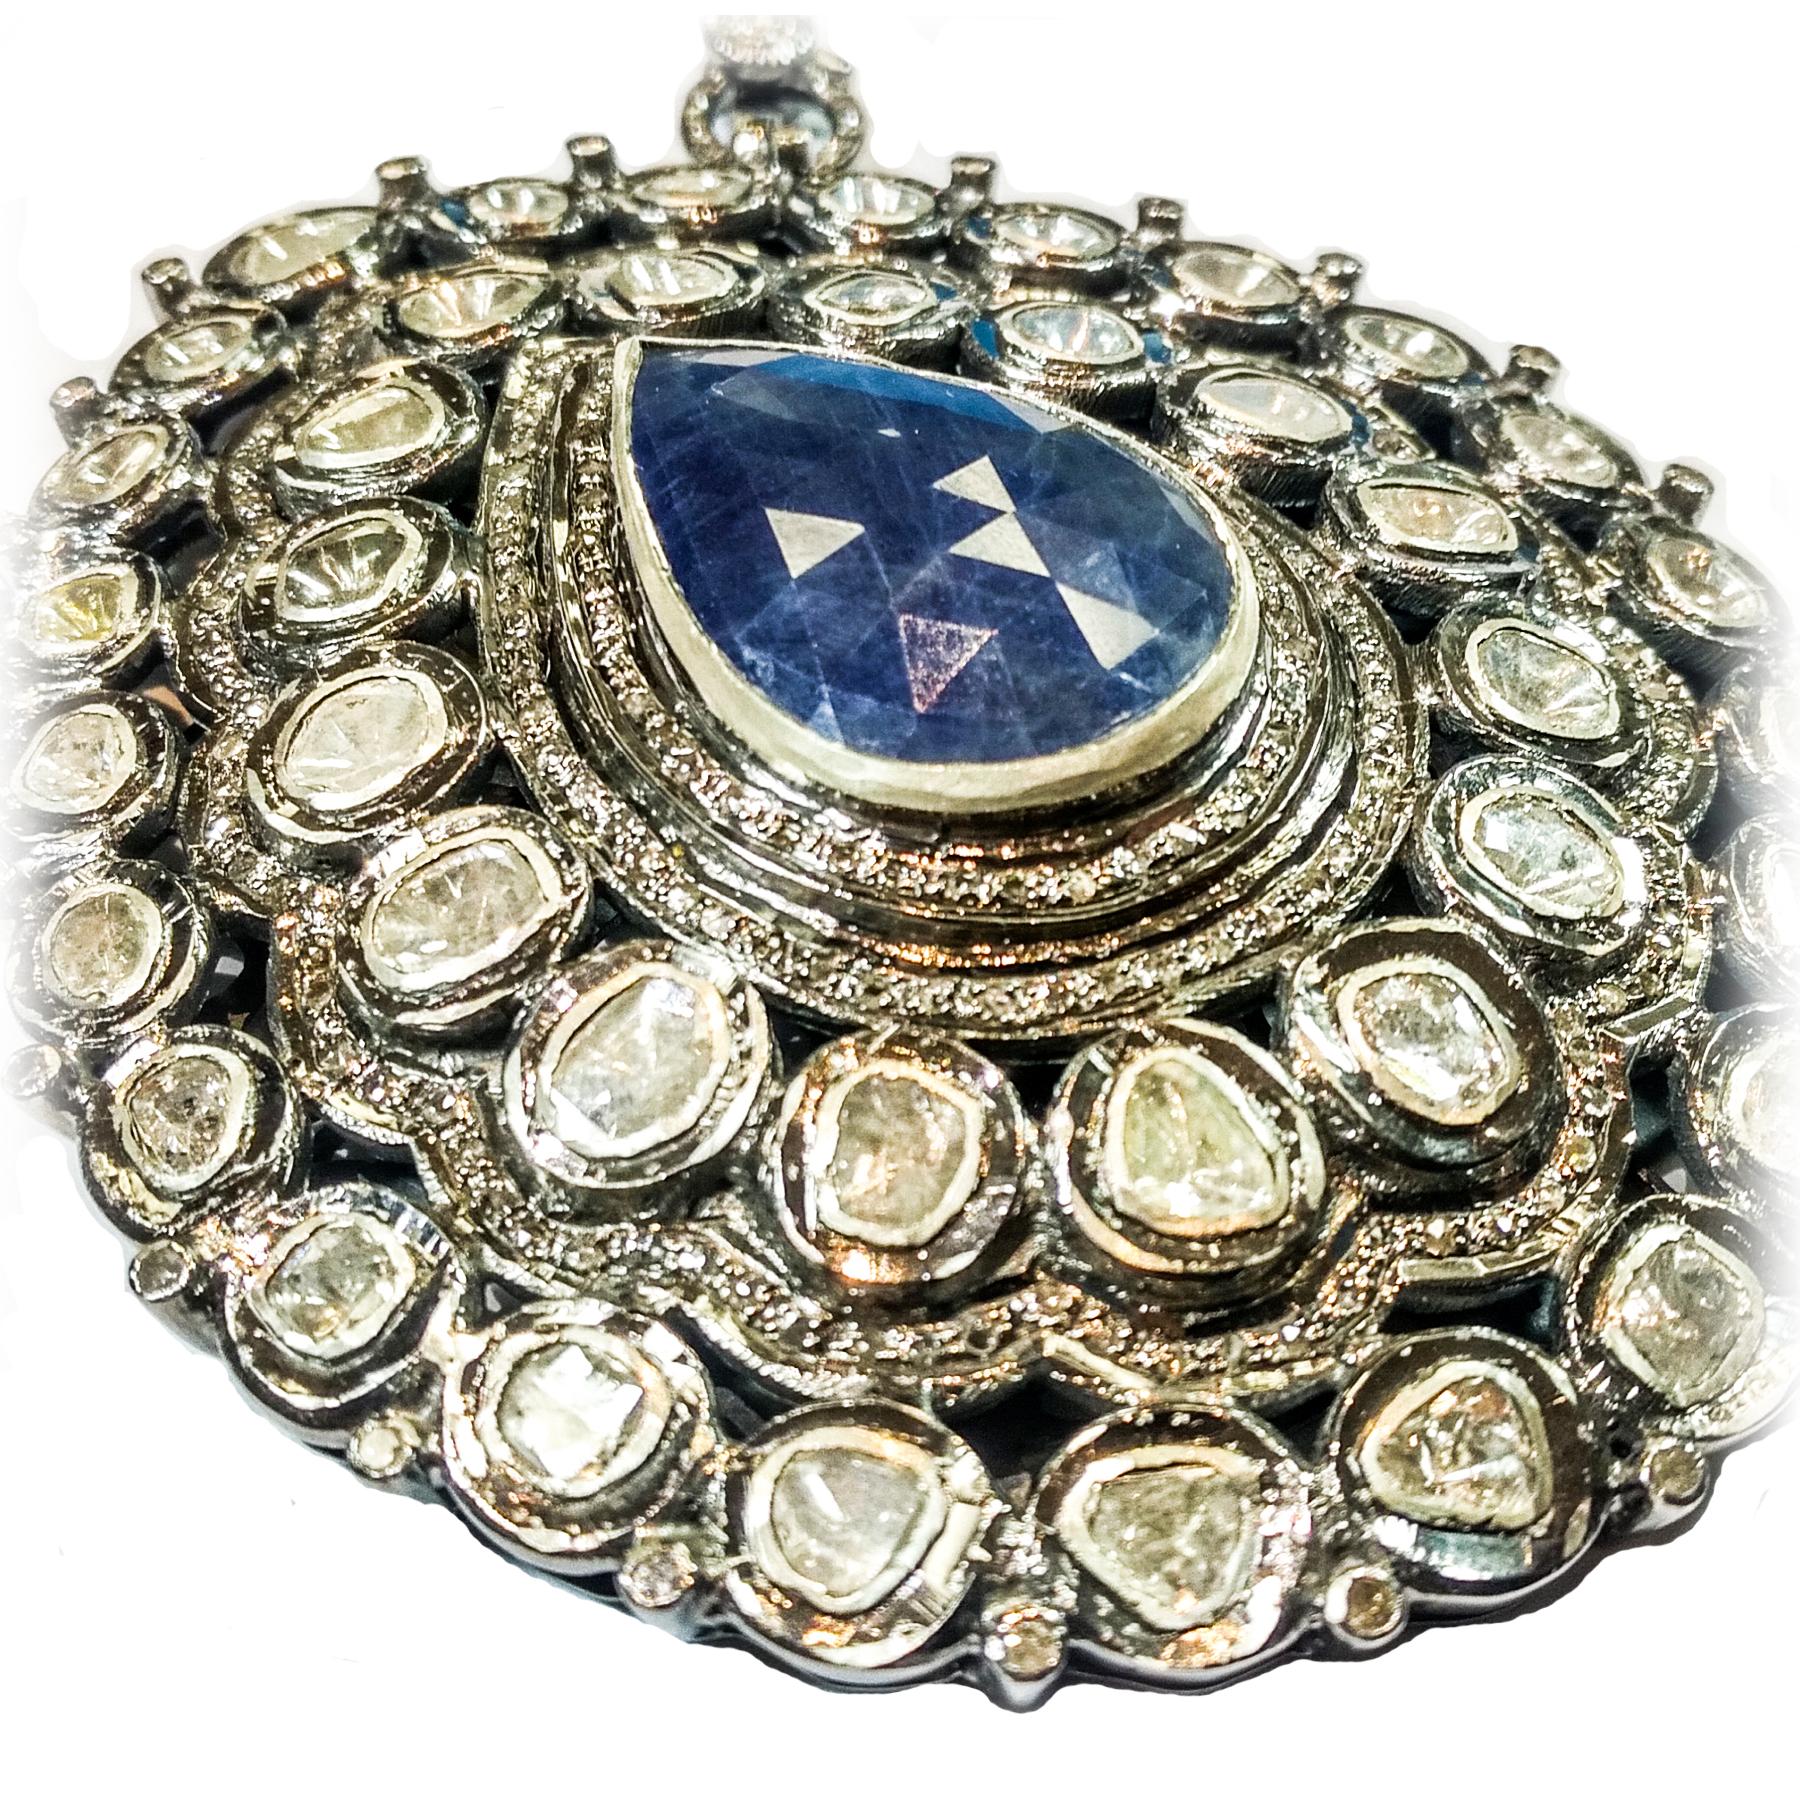 Moghul inspired, diamond (polki) 9.5 carats, sapphire 18 carats, necklace with pearls. Contemporary handcrafted pear shape blue sapphire surrounded with diamond (polki) mounted in bazel setting, and beautiful basket back design, accented with